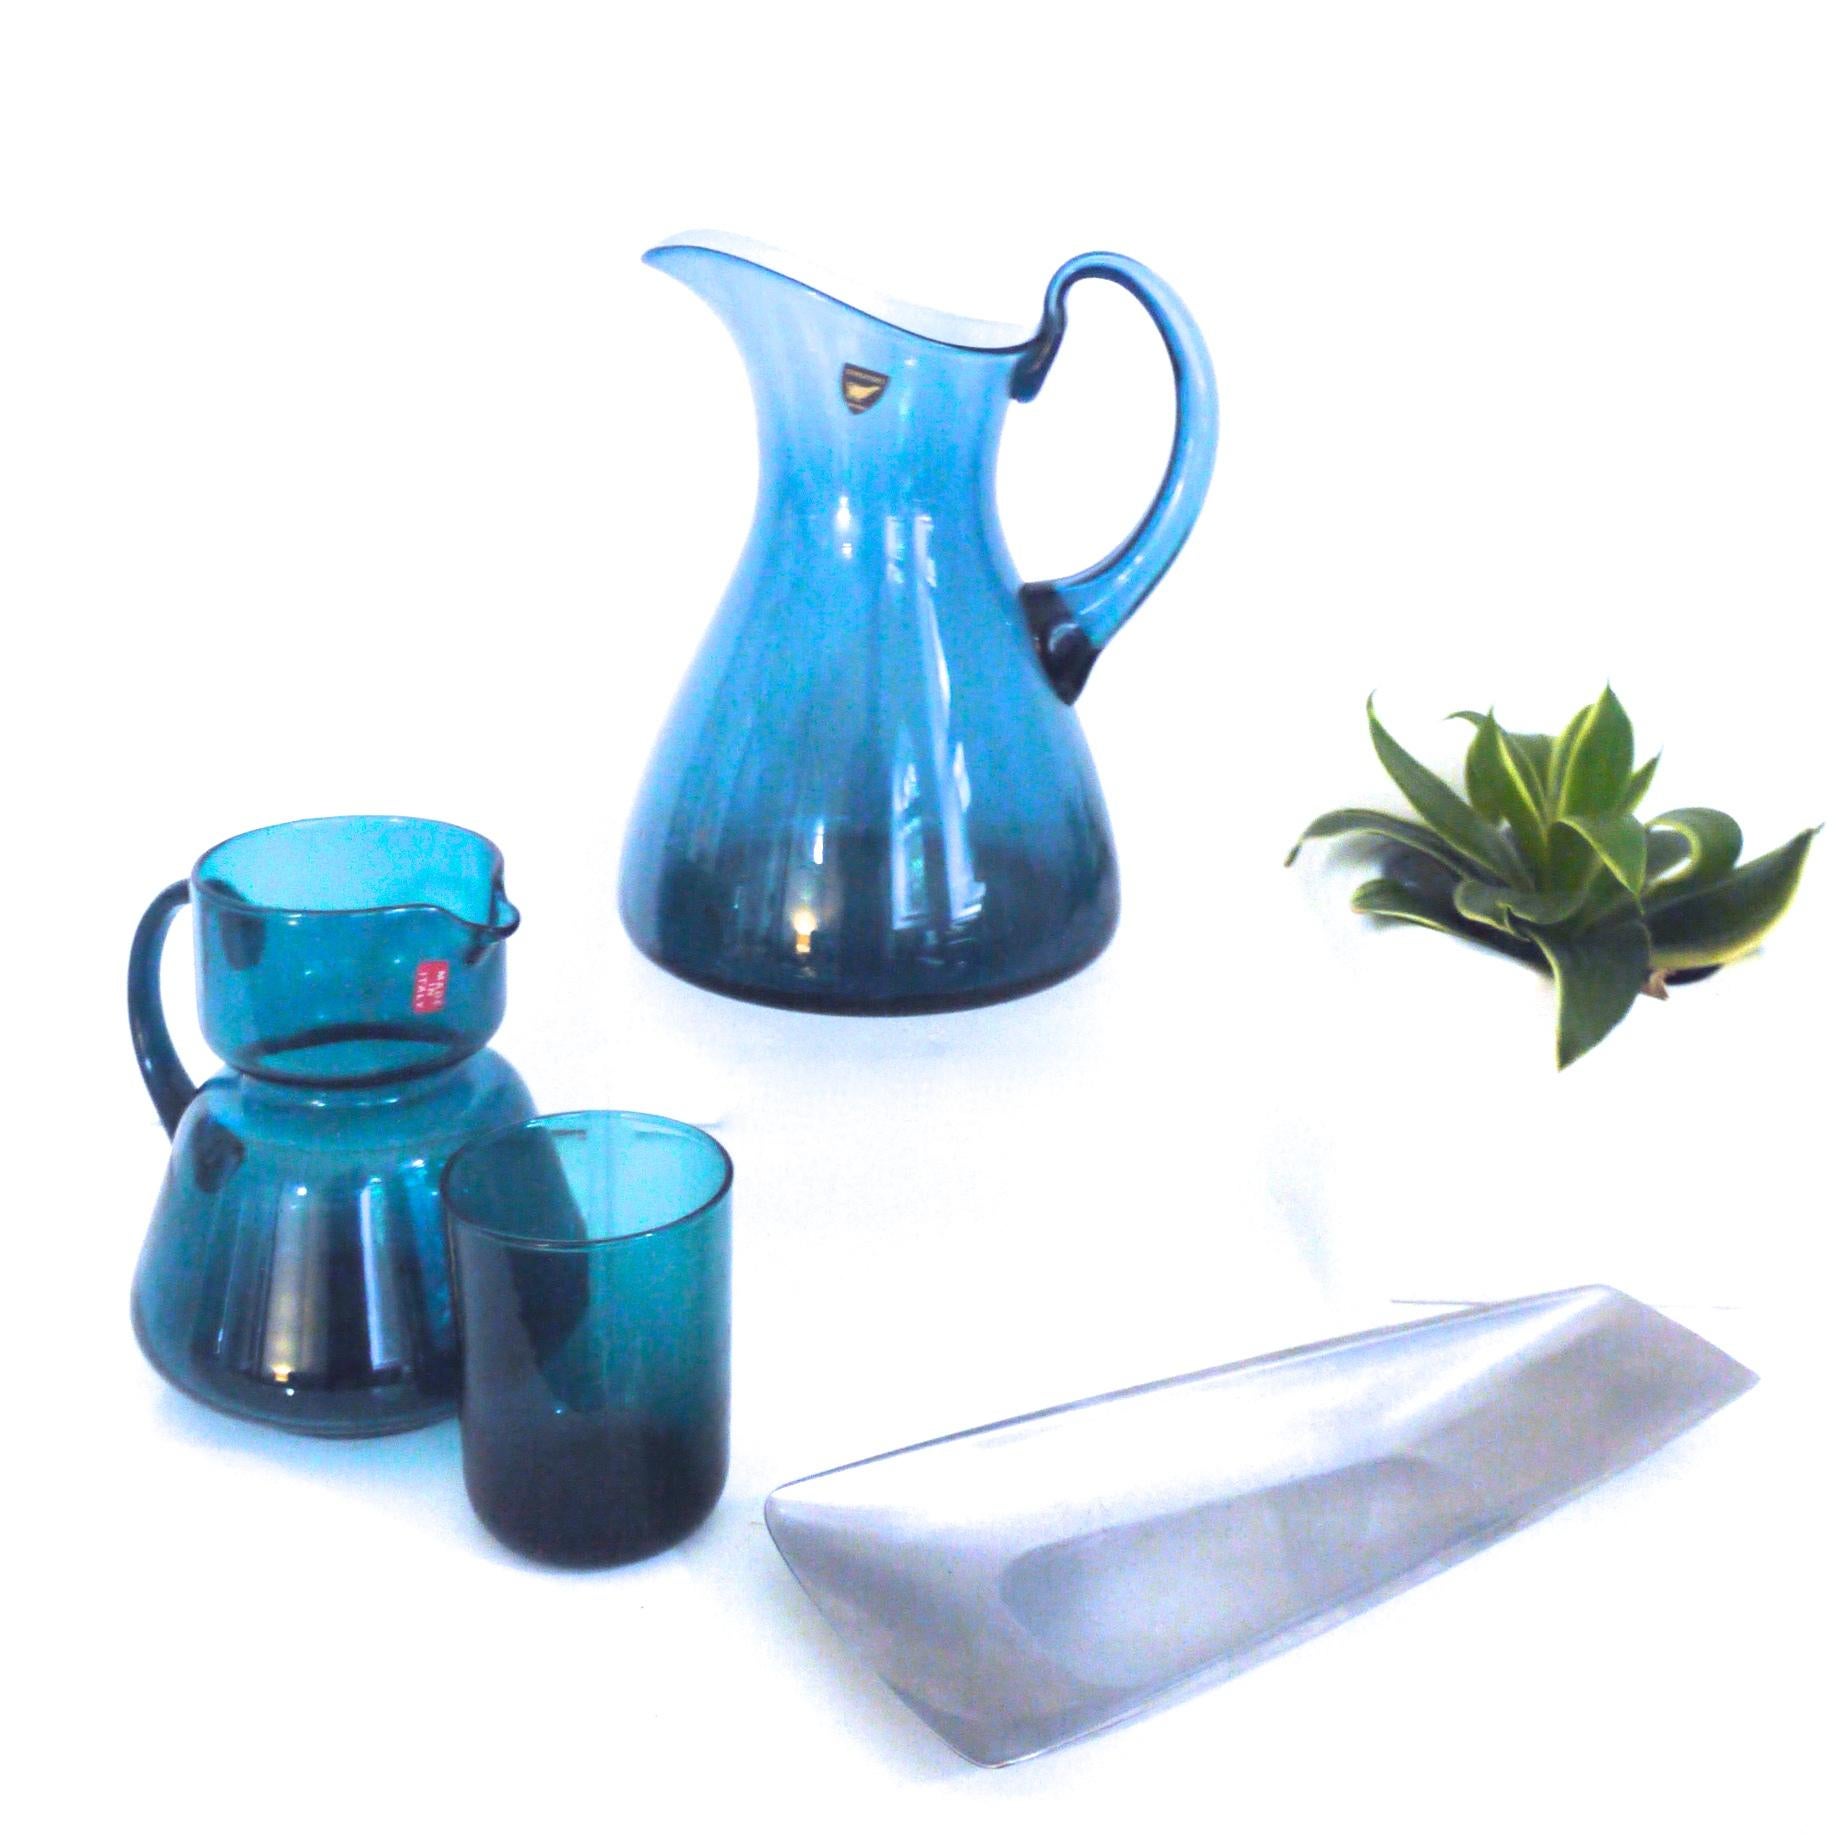 Scandinavian Modern Orrefors Table Water Jug Pitcher with Label Late 1970s For Sale